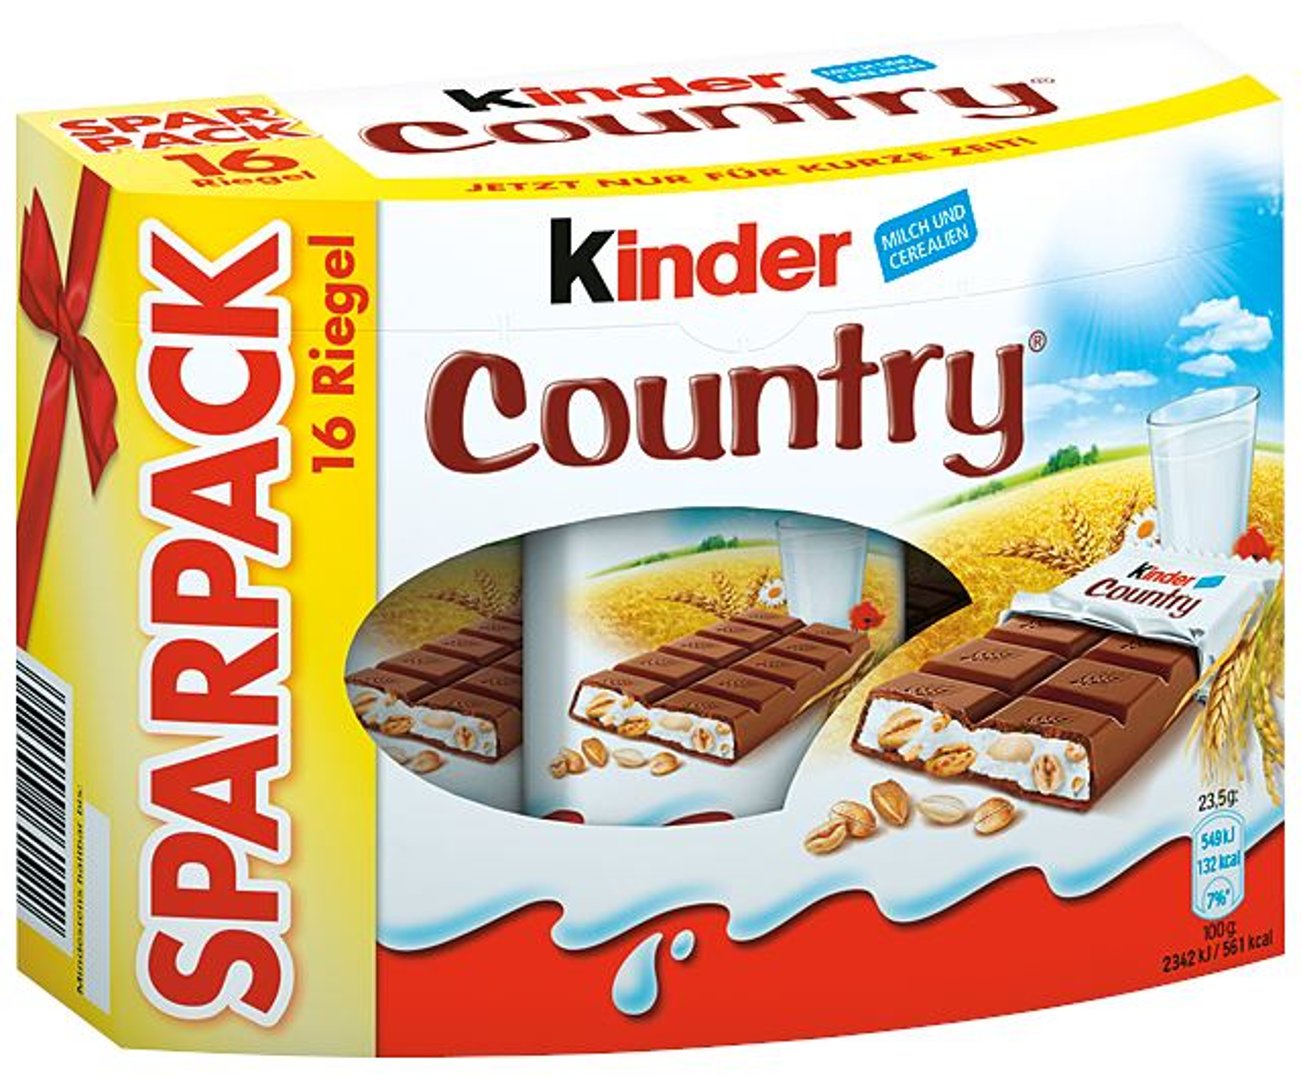 Kinder - Country - 376 g Packung